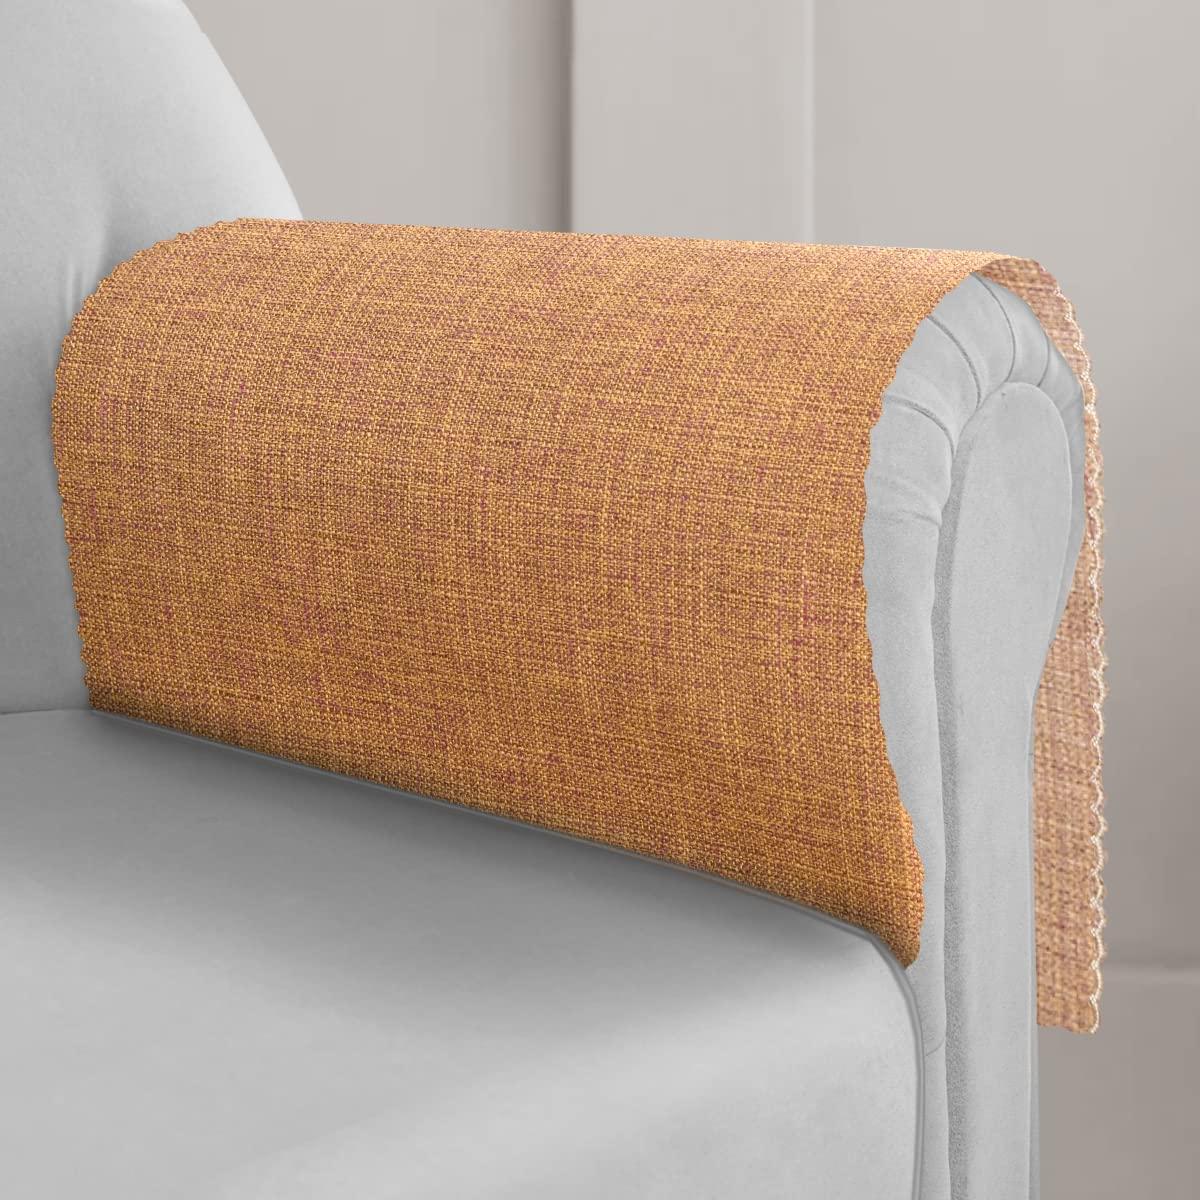 Faux Linen armchair Arm Covers Armchair Slipcovers for Recliner Chair Arm Covers for Chairs and Sofas Anti-Slip Sofa Arm Protector Covers for Pets, Cats, Set of 2, Orange Ochre 0